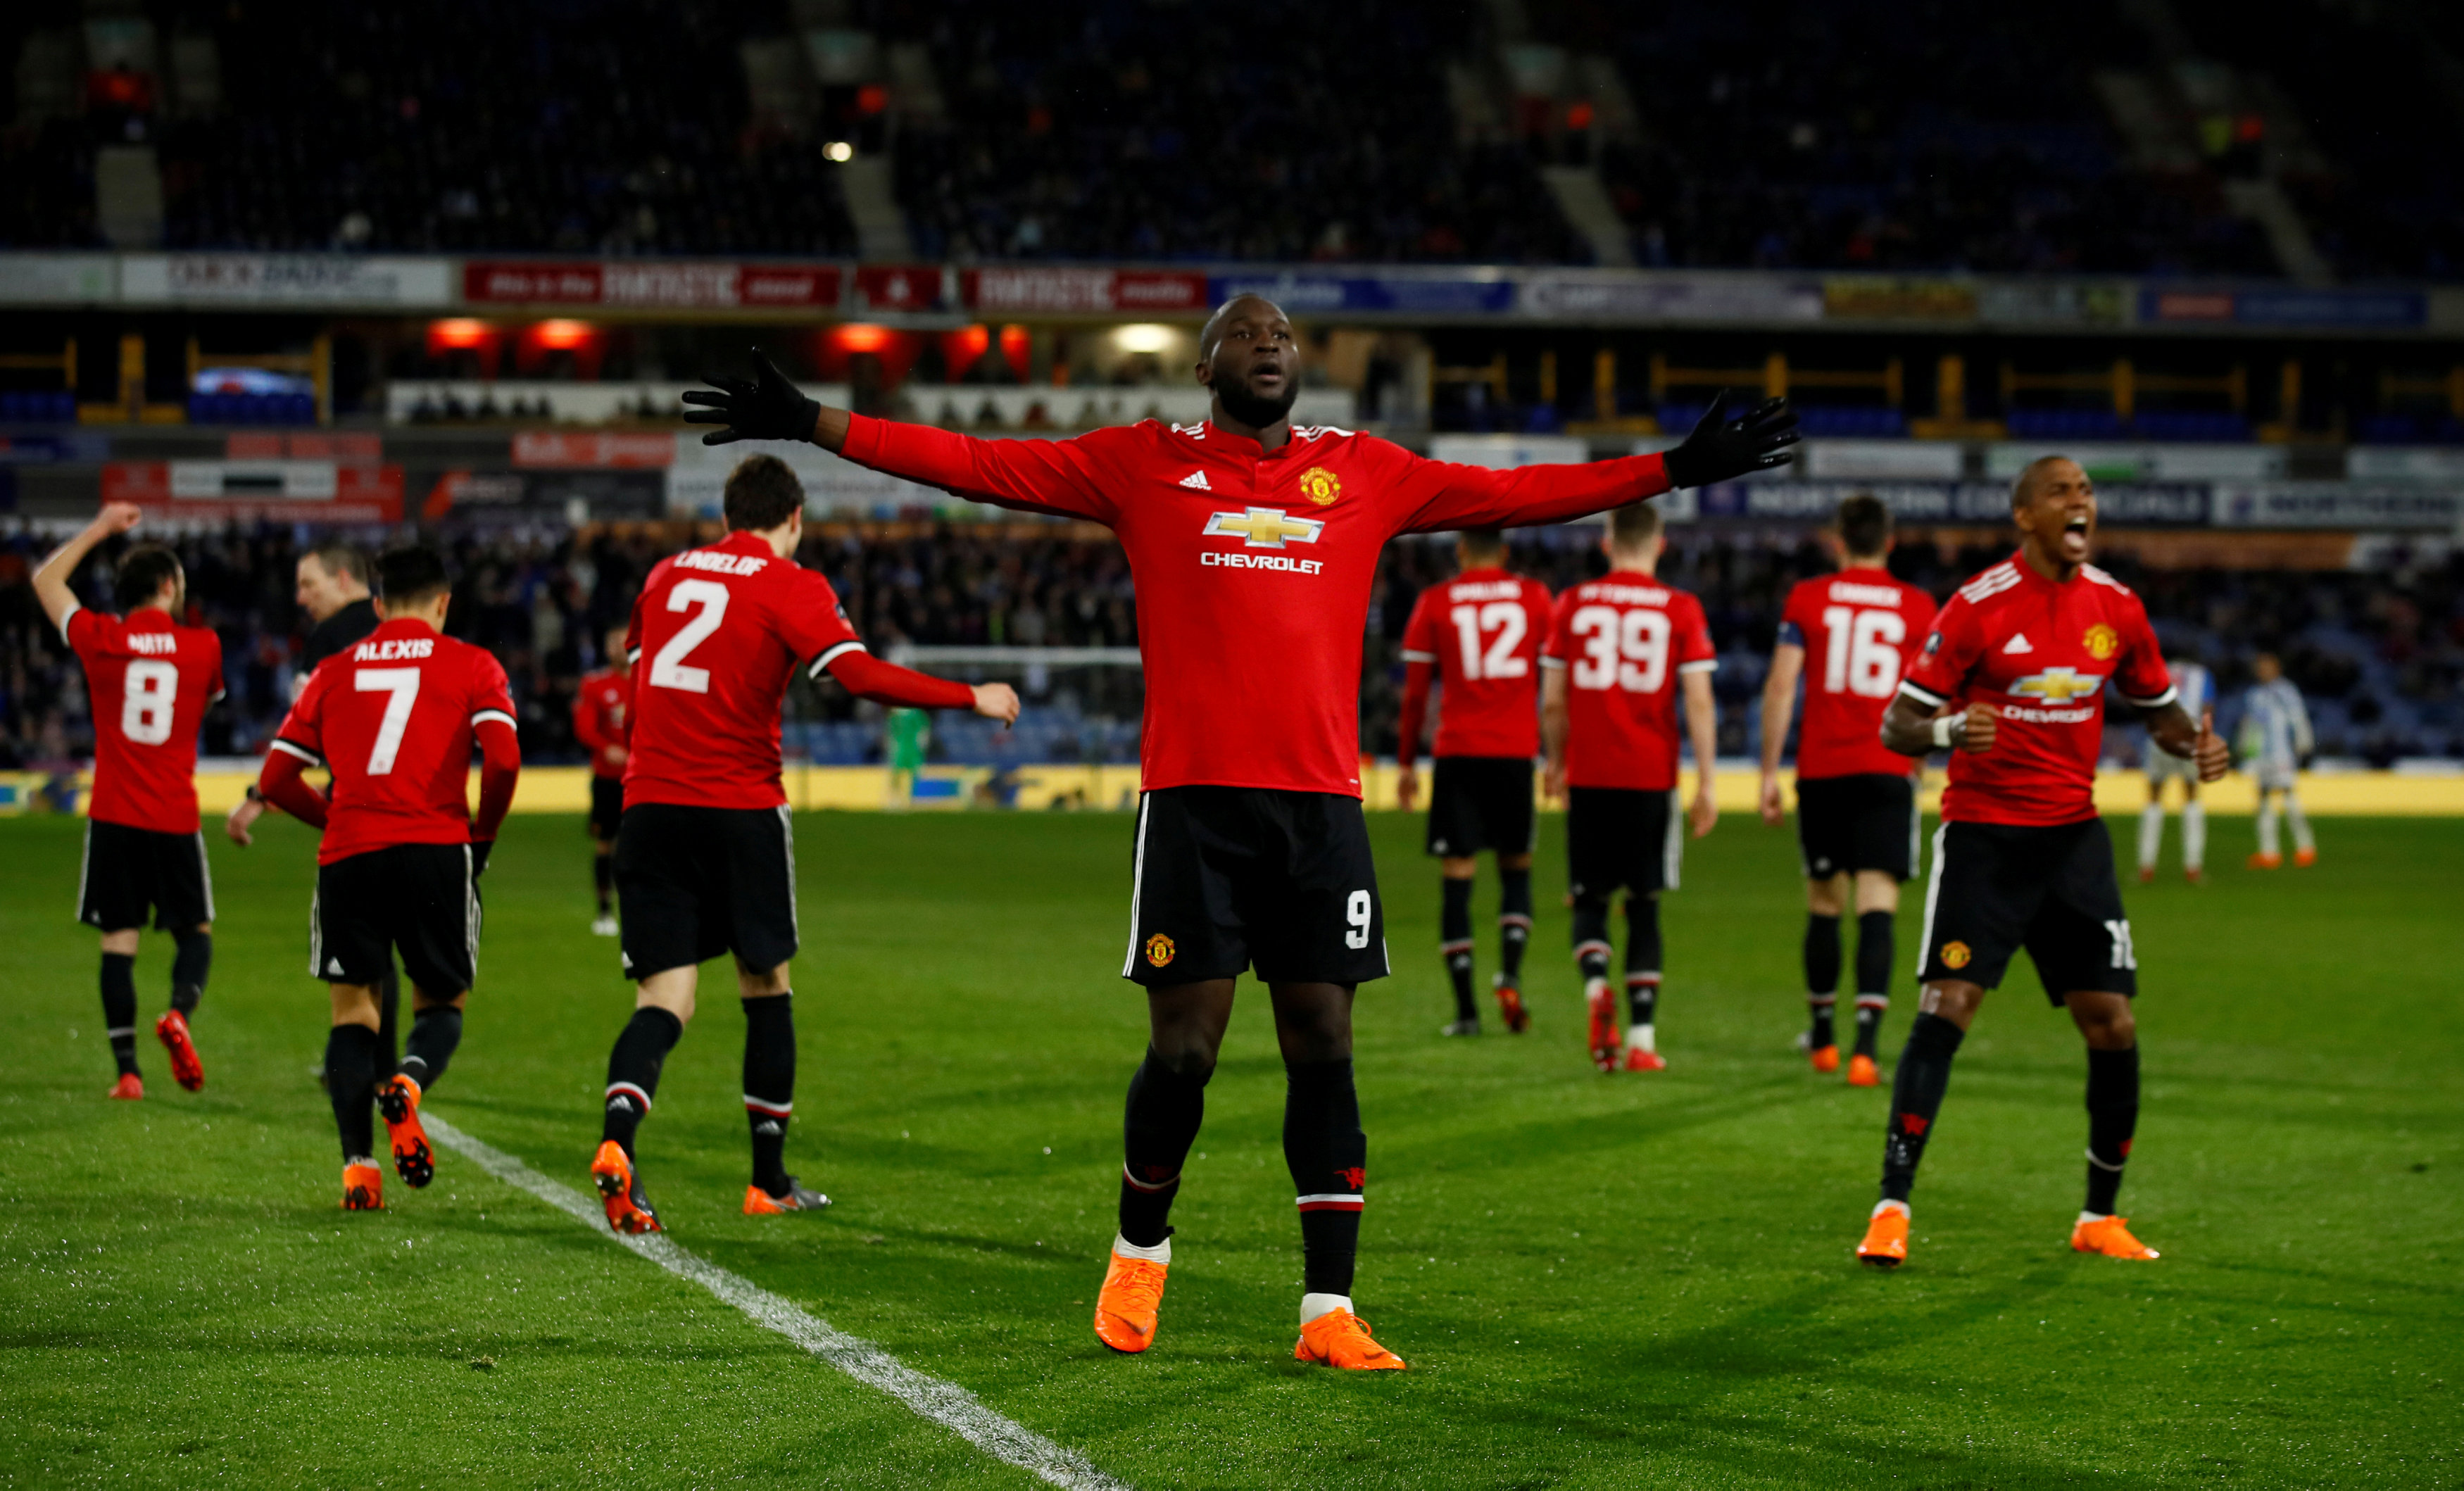 Huddersfield Town 0-2 Manchester United: Three talking points from the John Smith's Stadium